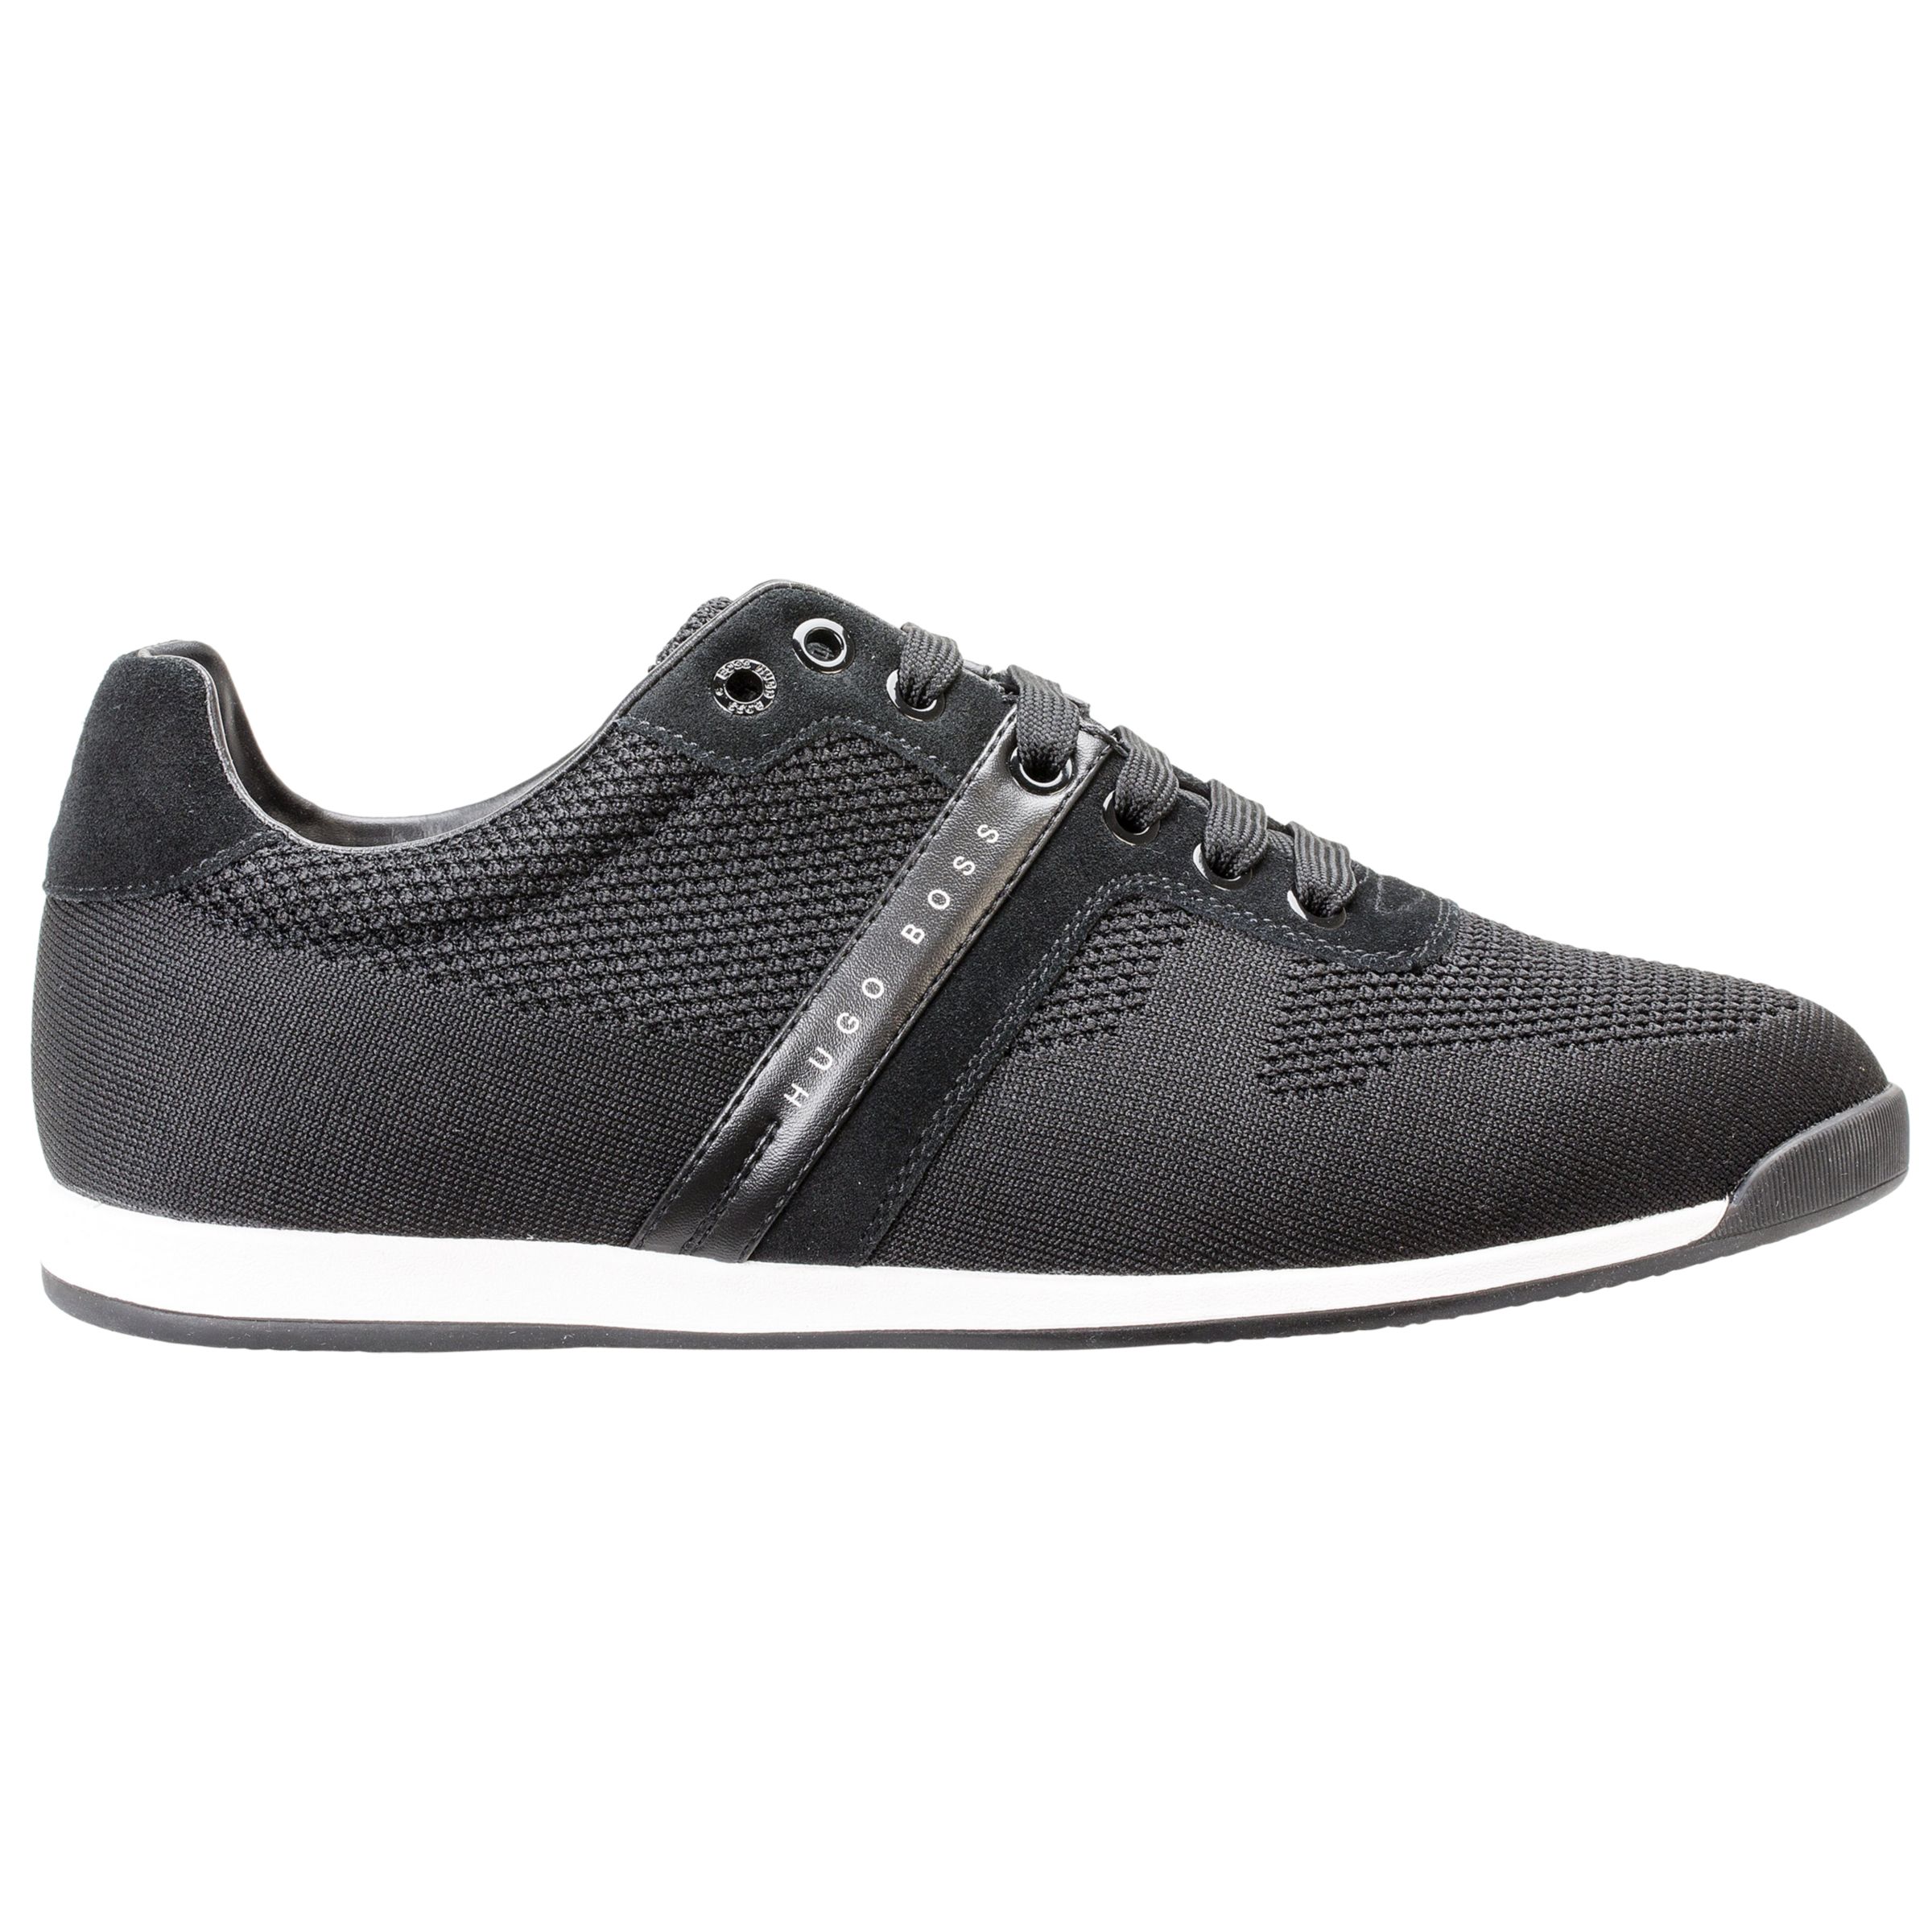 boss athleisure maze low top knit trainers